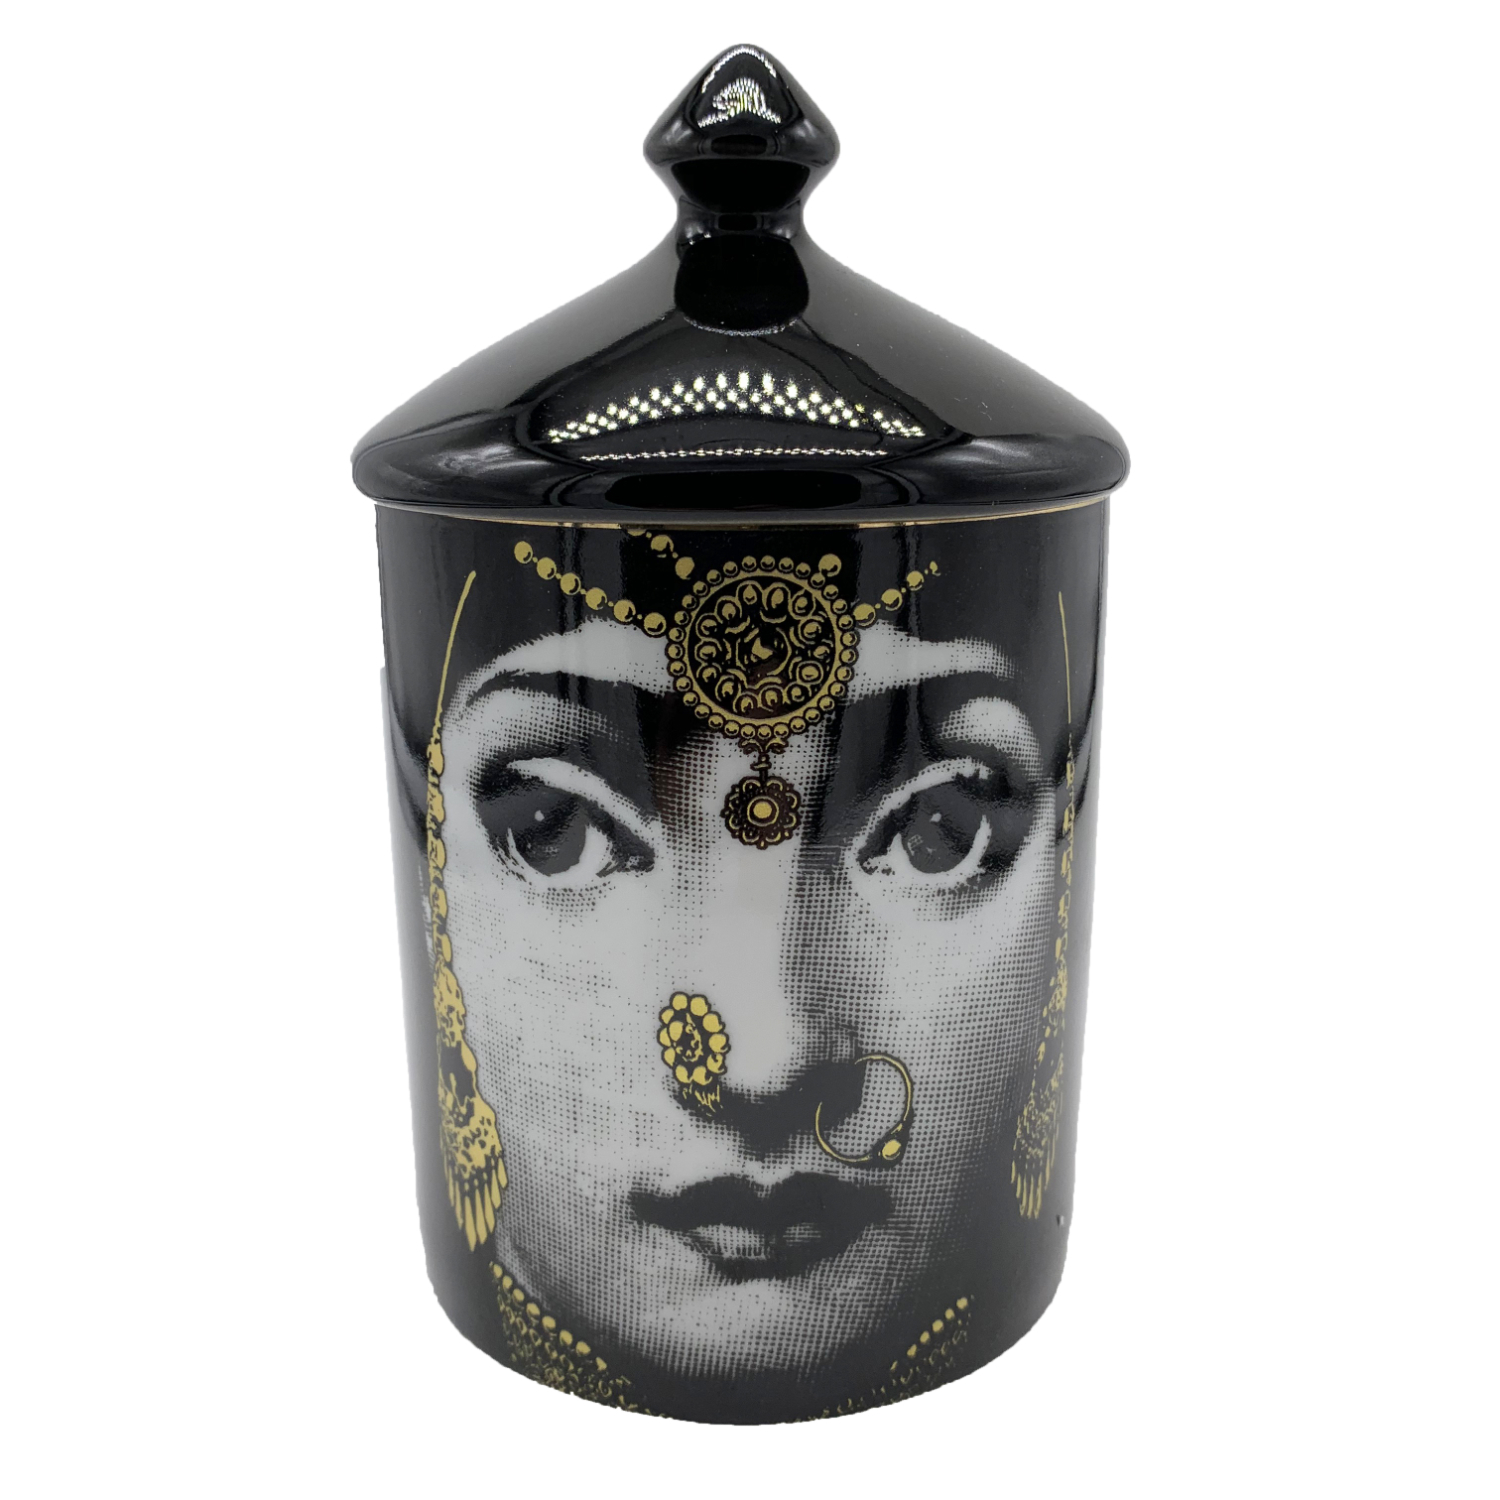 New Fornasetti Style Candle Holder Lina Face Vintage Storage Jar Art Home Decor 